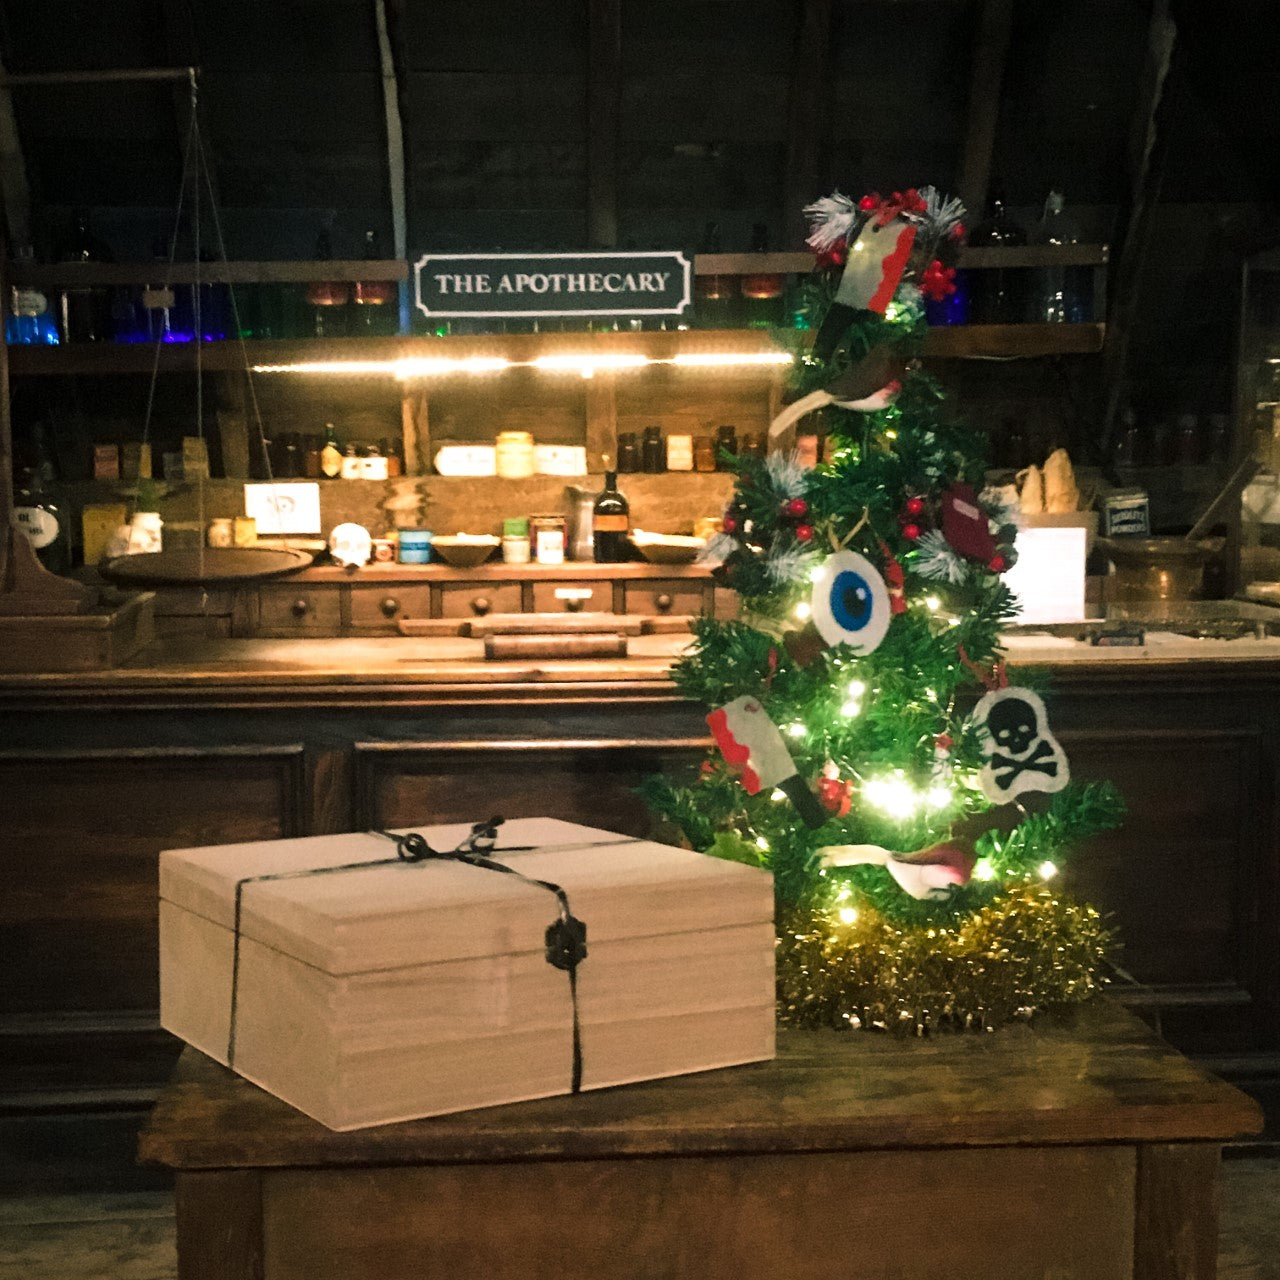 A wooden box next to a small Christmas tree decorated with skulls, eyes and cleavers, placed on a wooden table by the apothecary counter in the museum